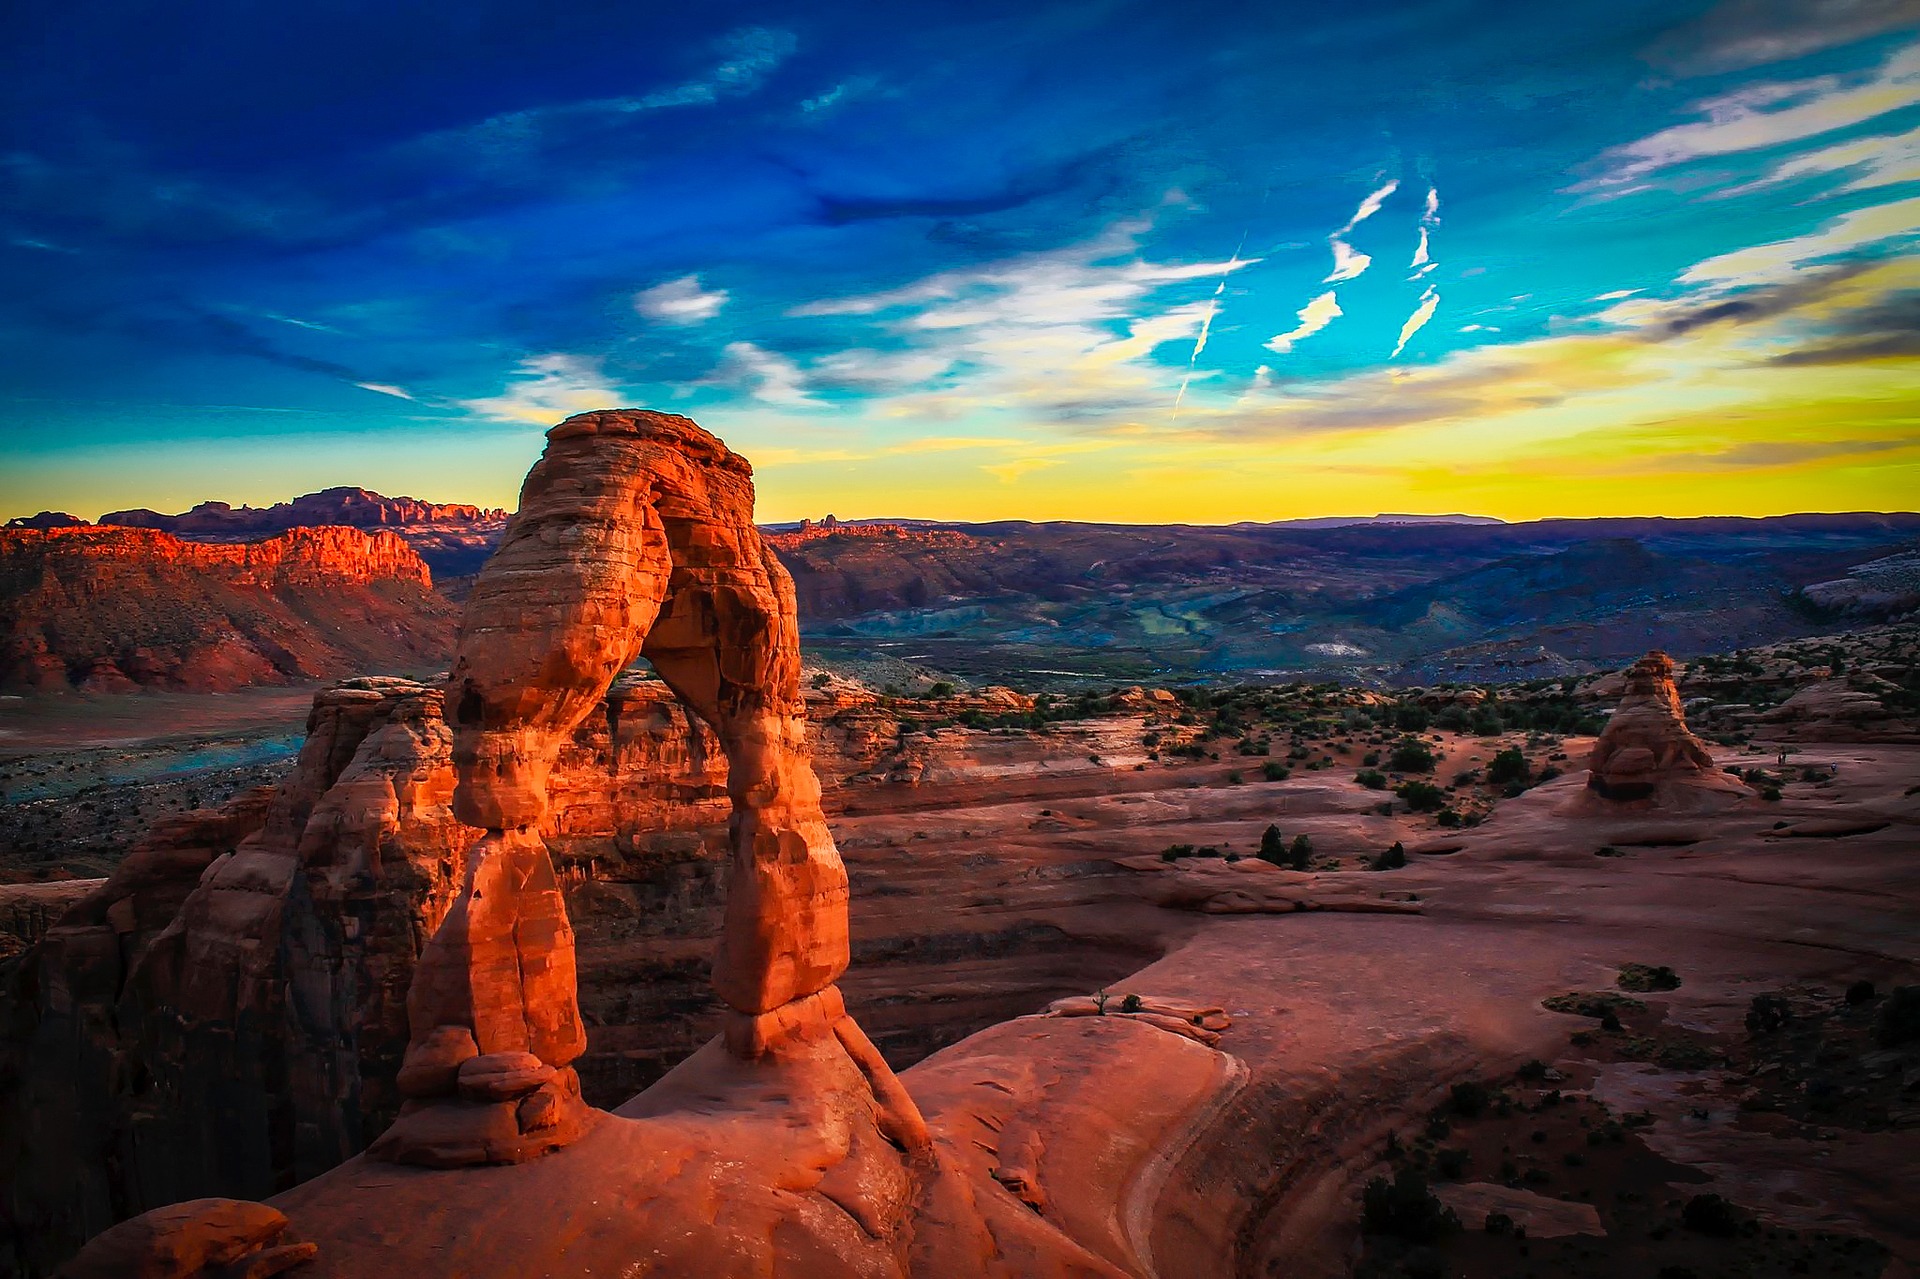 Utah's Mighty 5 - Arches National Park - The Red Rock Wonderland